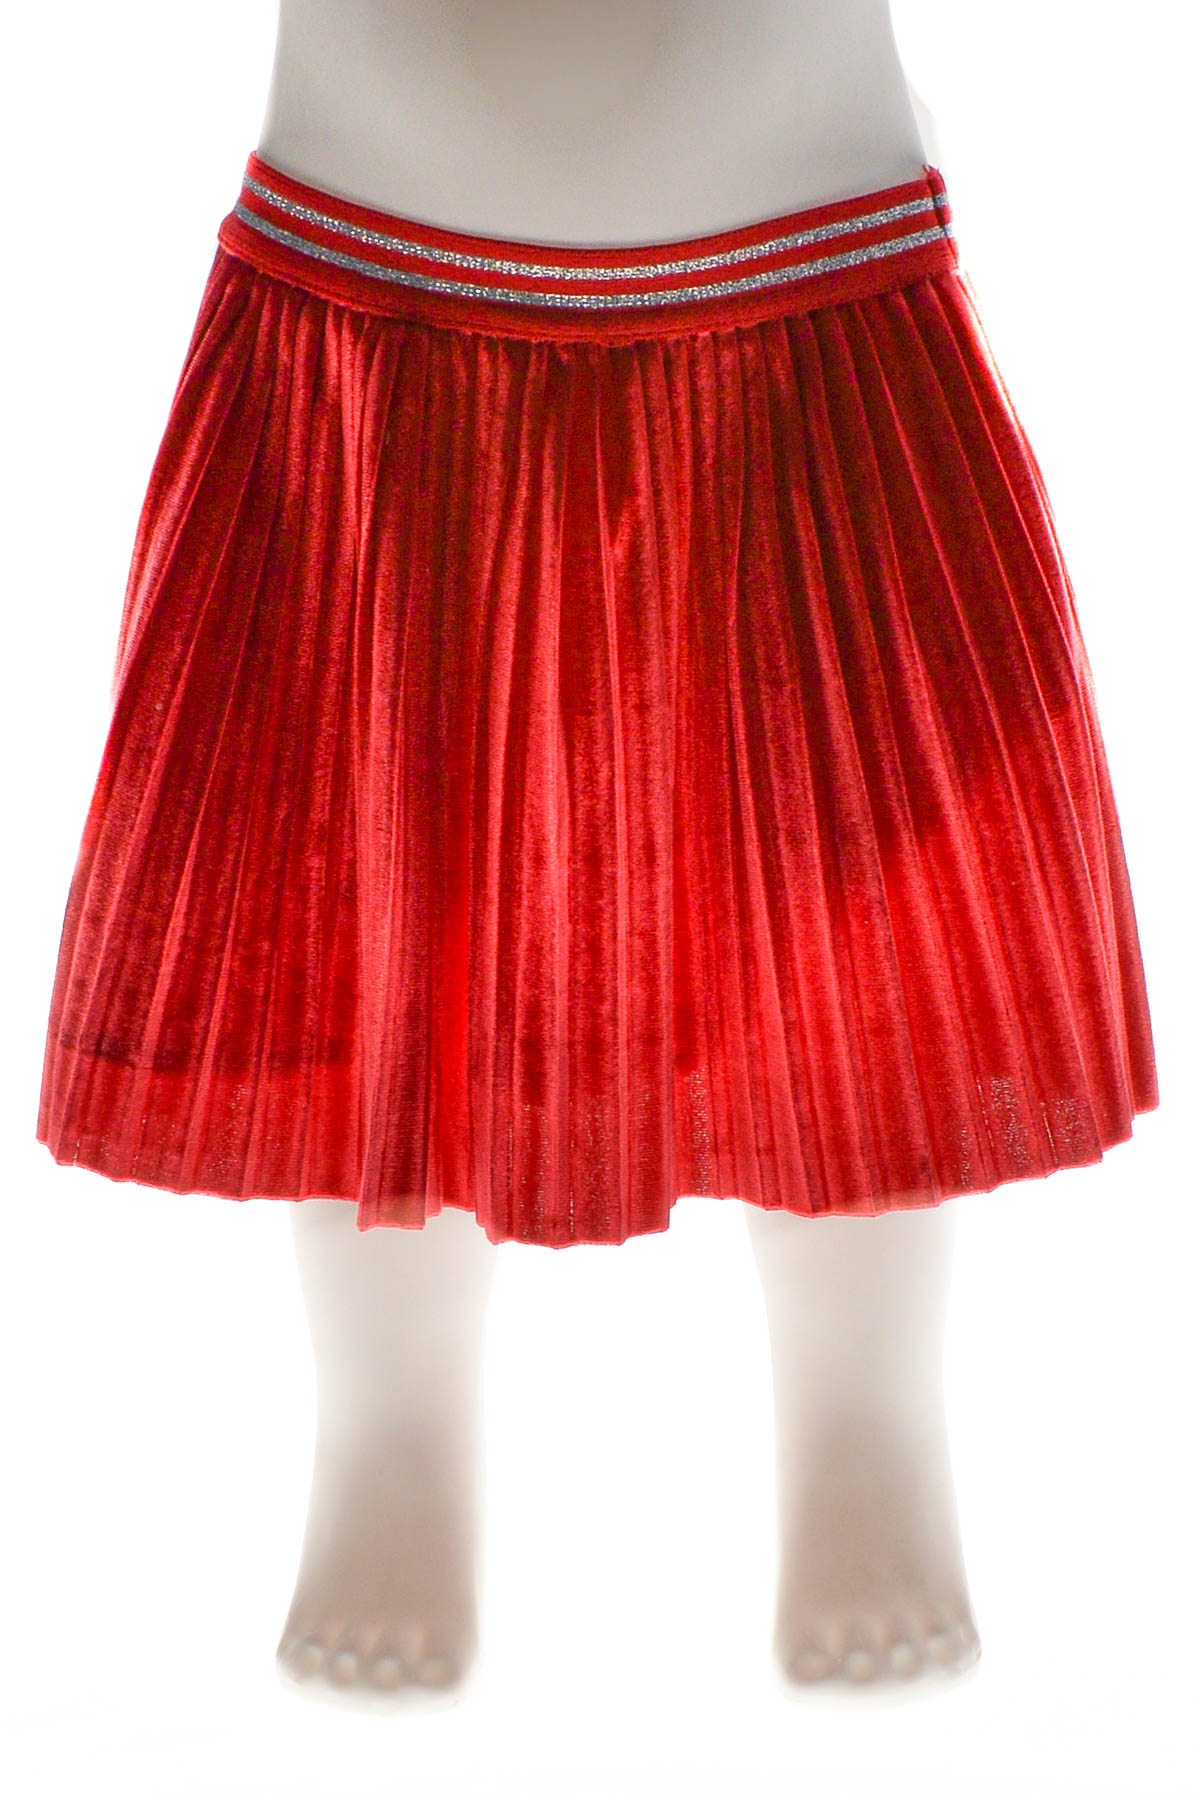 Girls' skirts - United Colors of Benetton - 0